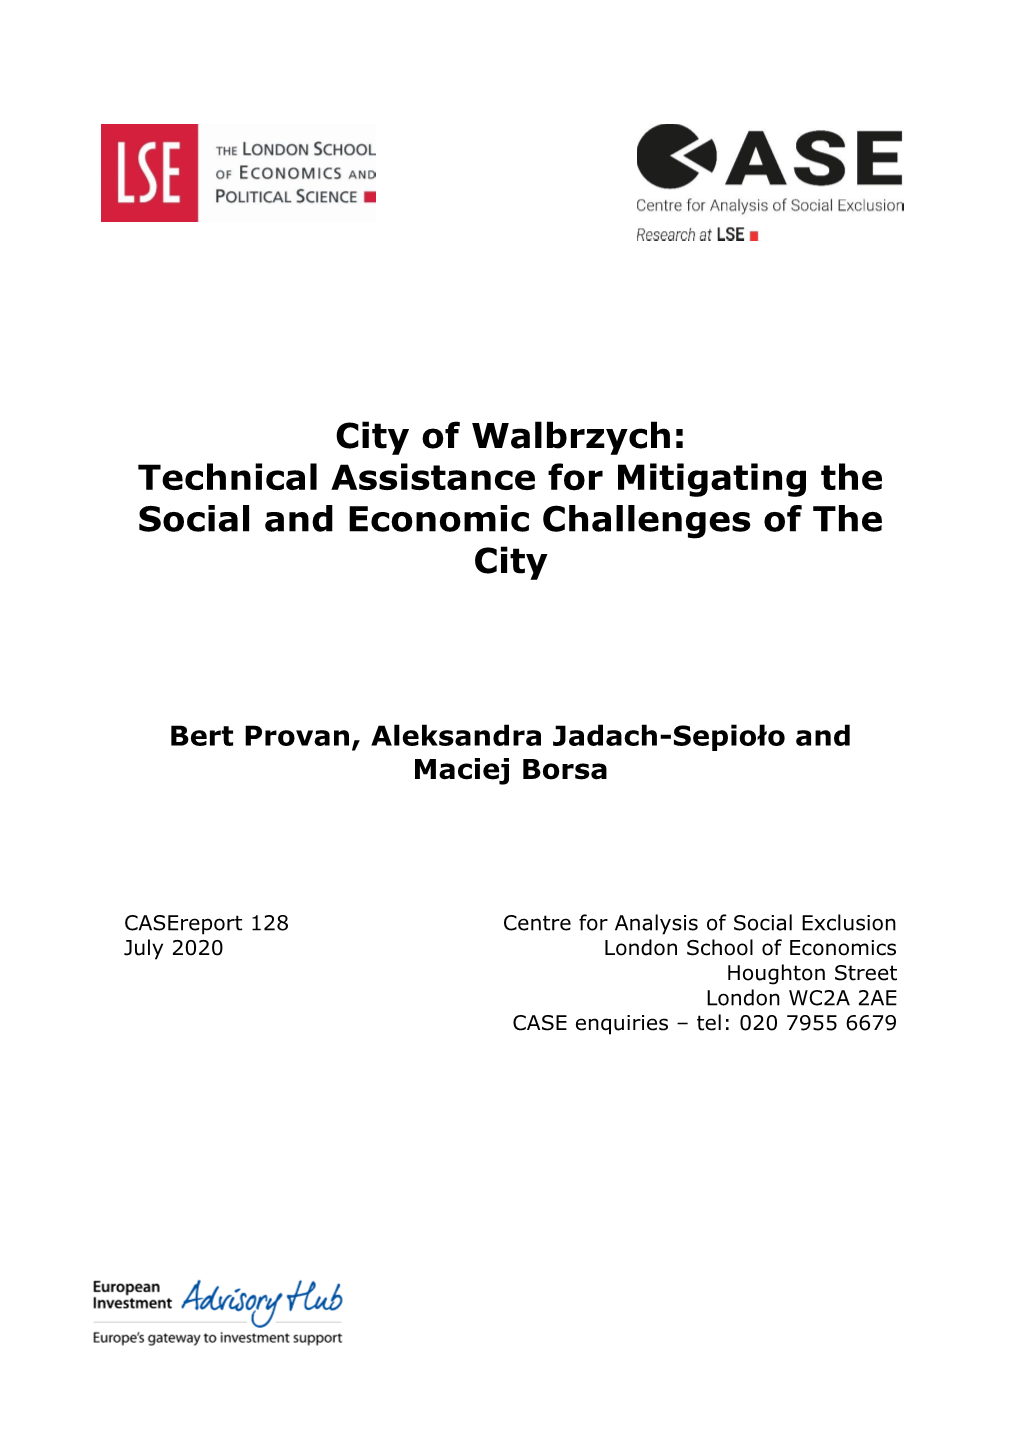 City of Walbrzych: Technical Assistance for Mitigating the Social and Economic Challenges of the City